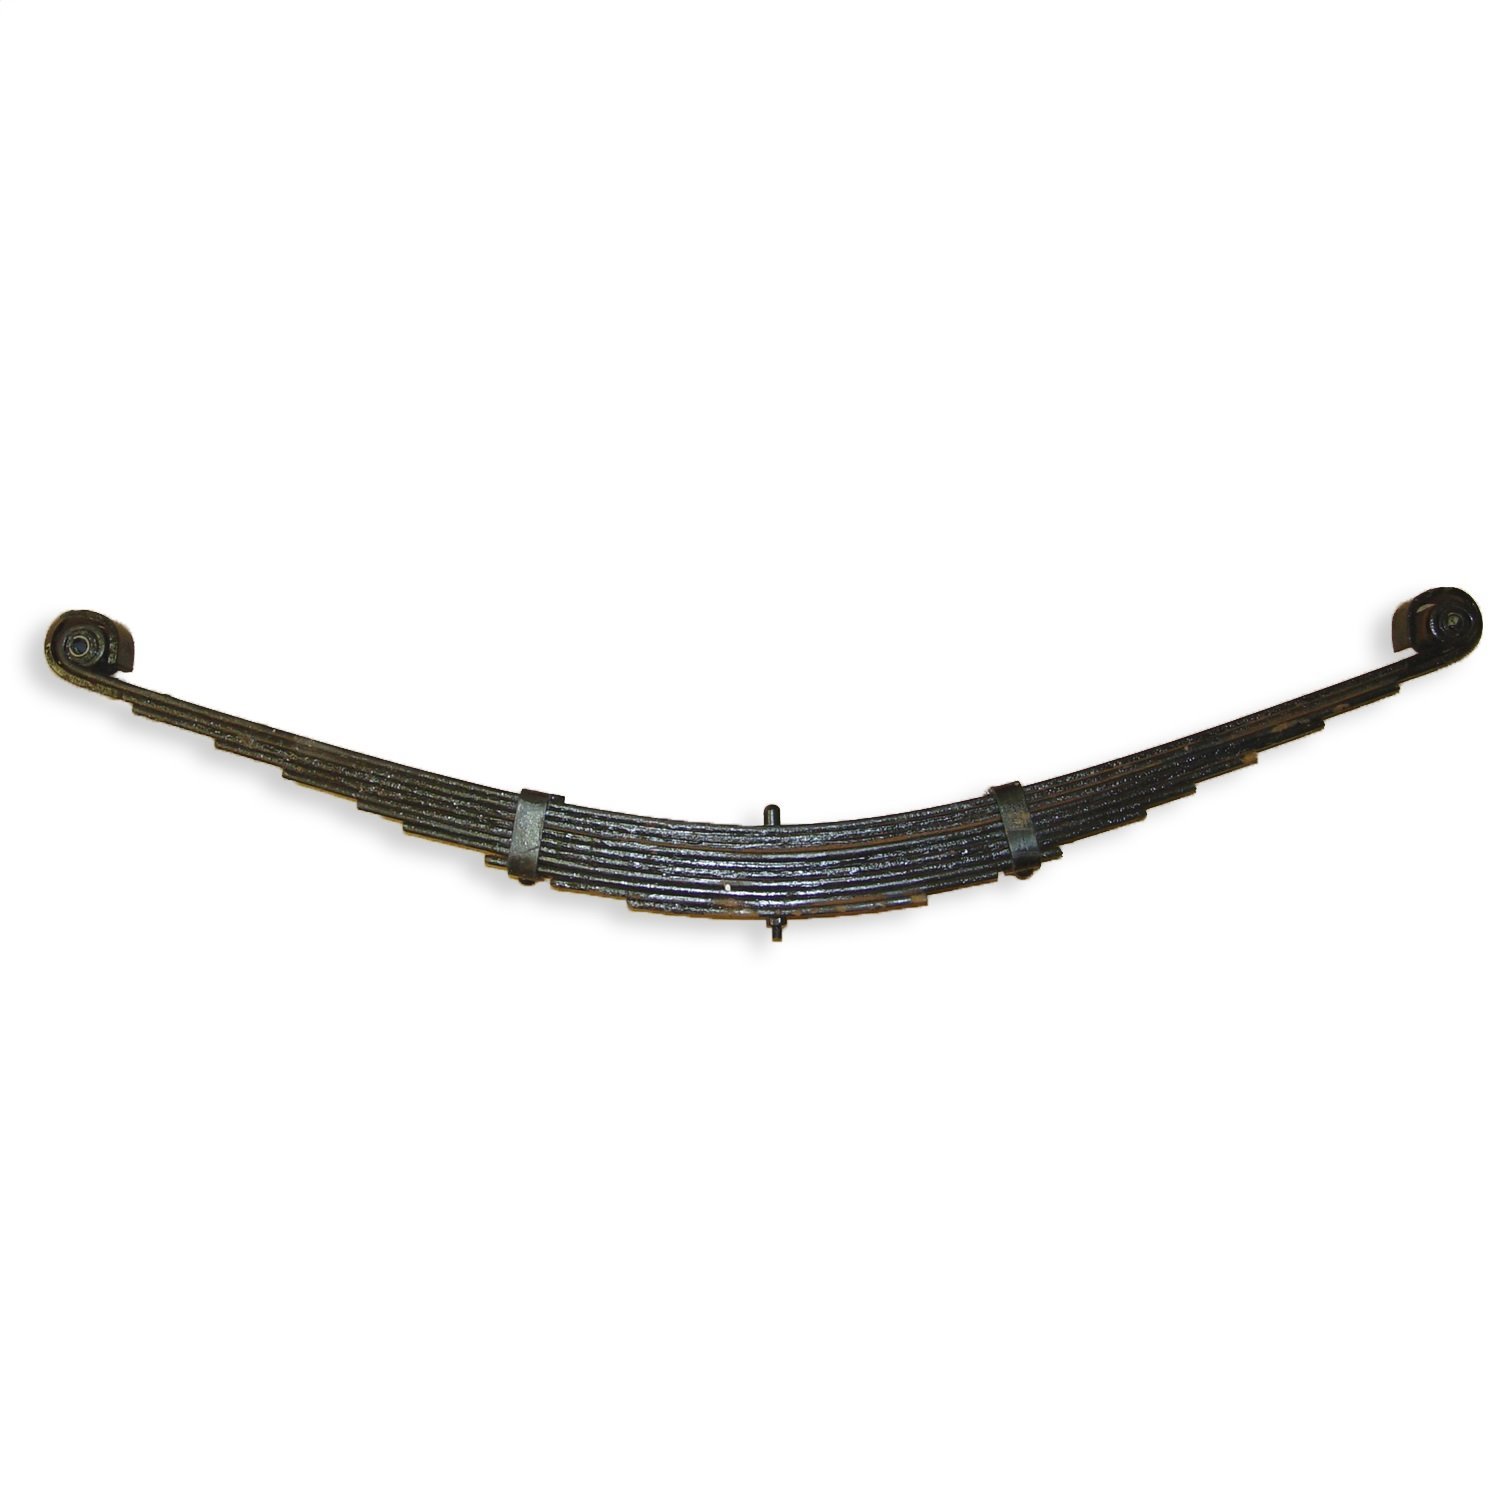 Stock replacement 10-leaf front spring from Omix-ADA, Fits